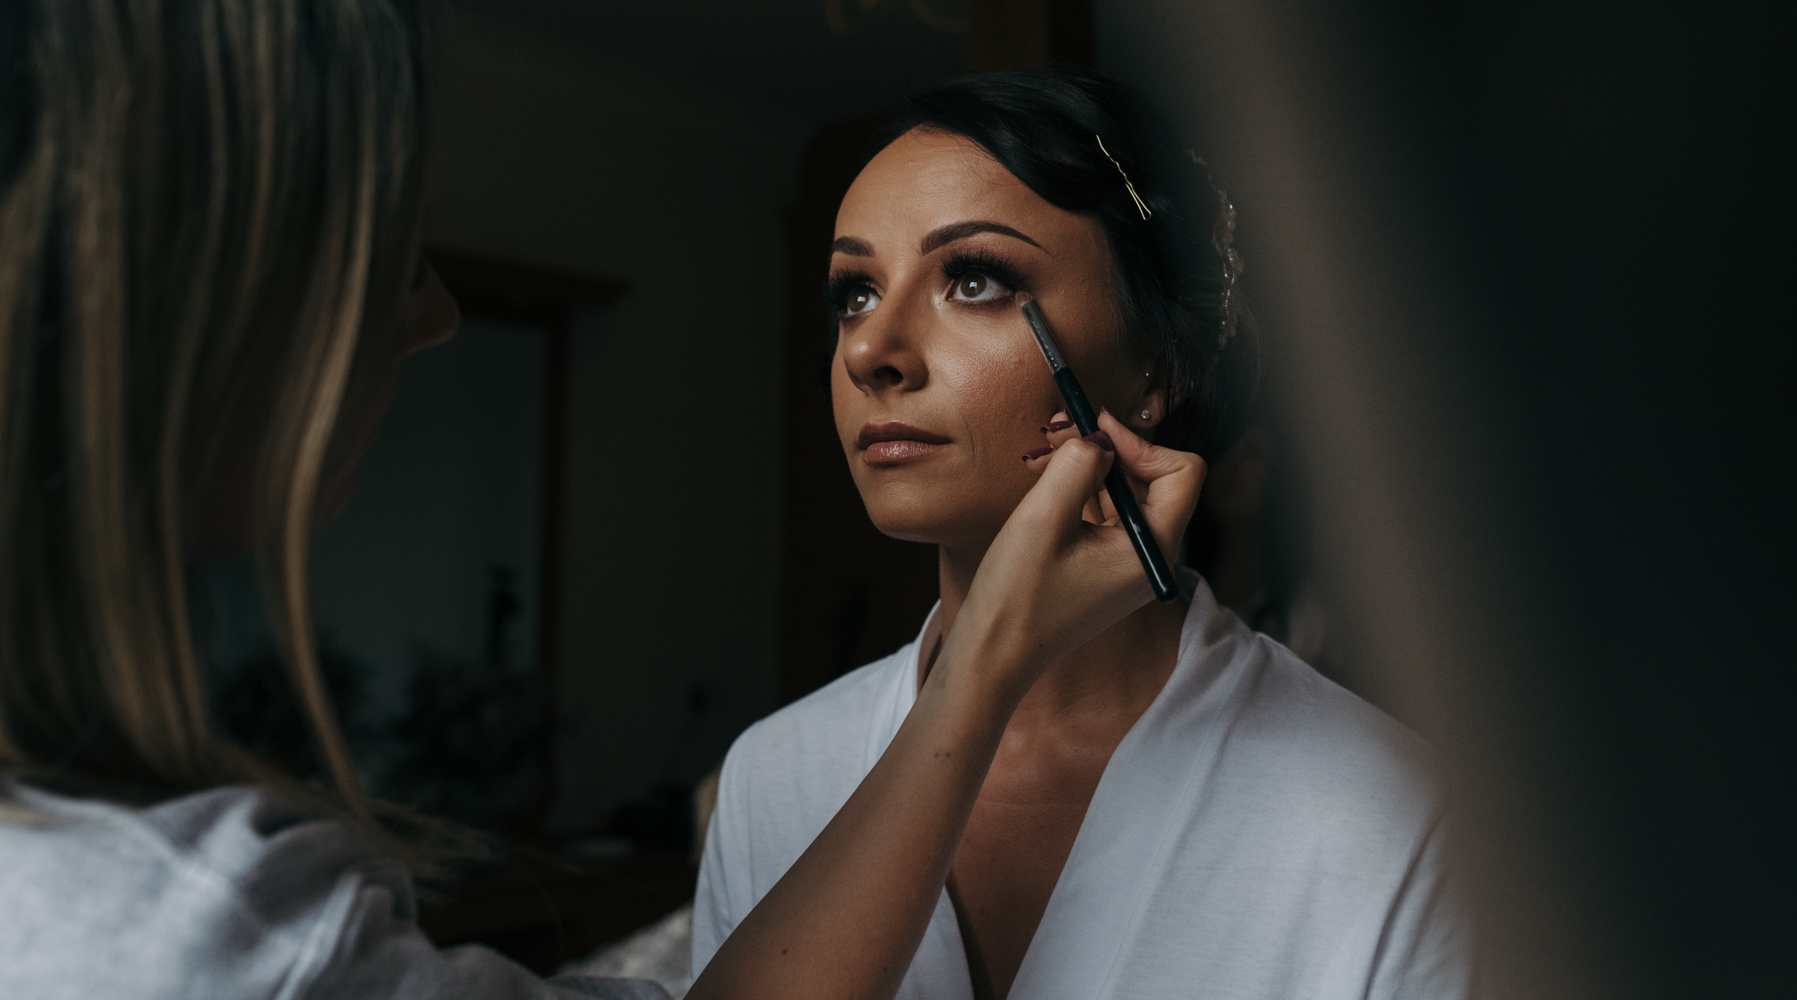 The bride having makeup done during morning preparations